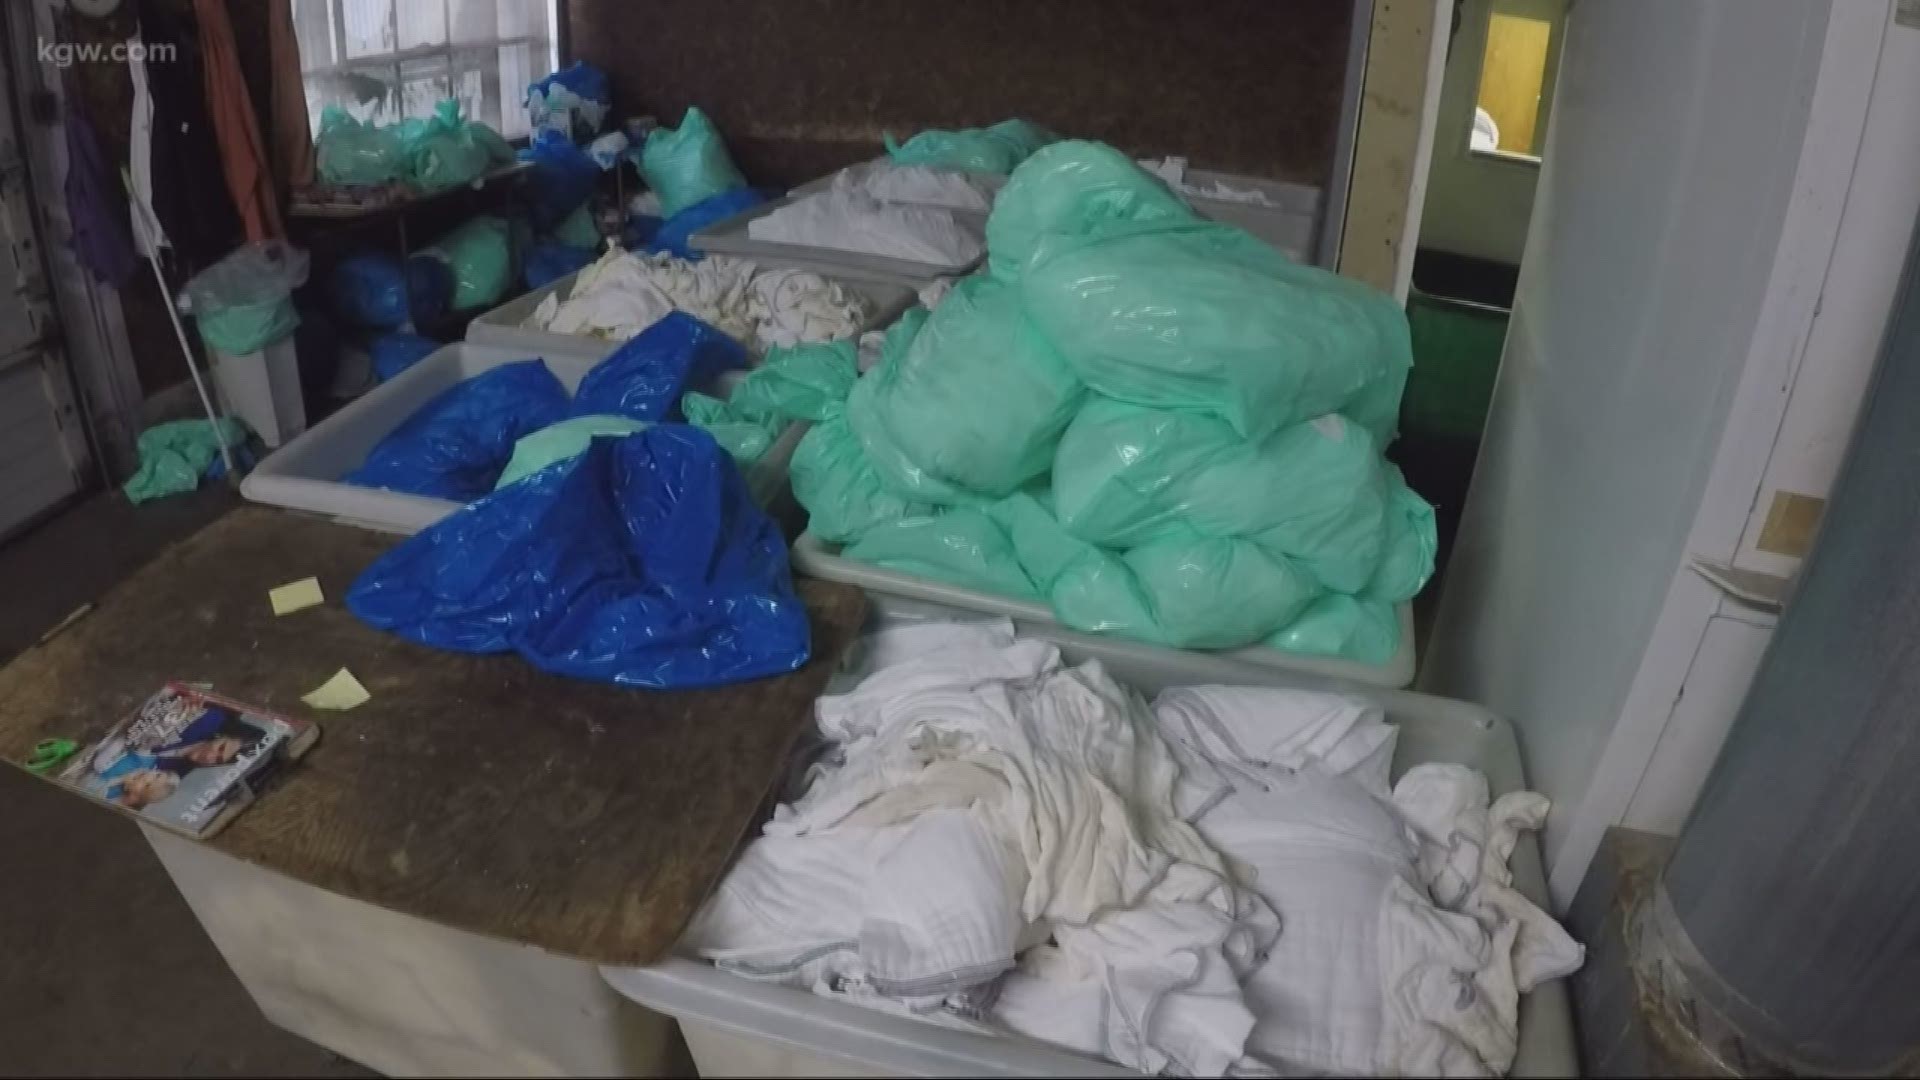 Dirty diapers are piling up at a Portland diaper service after a small fire.